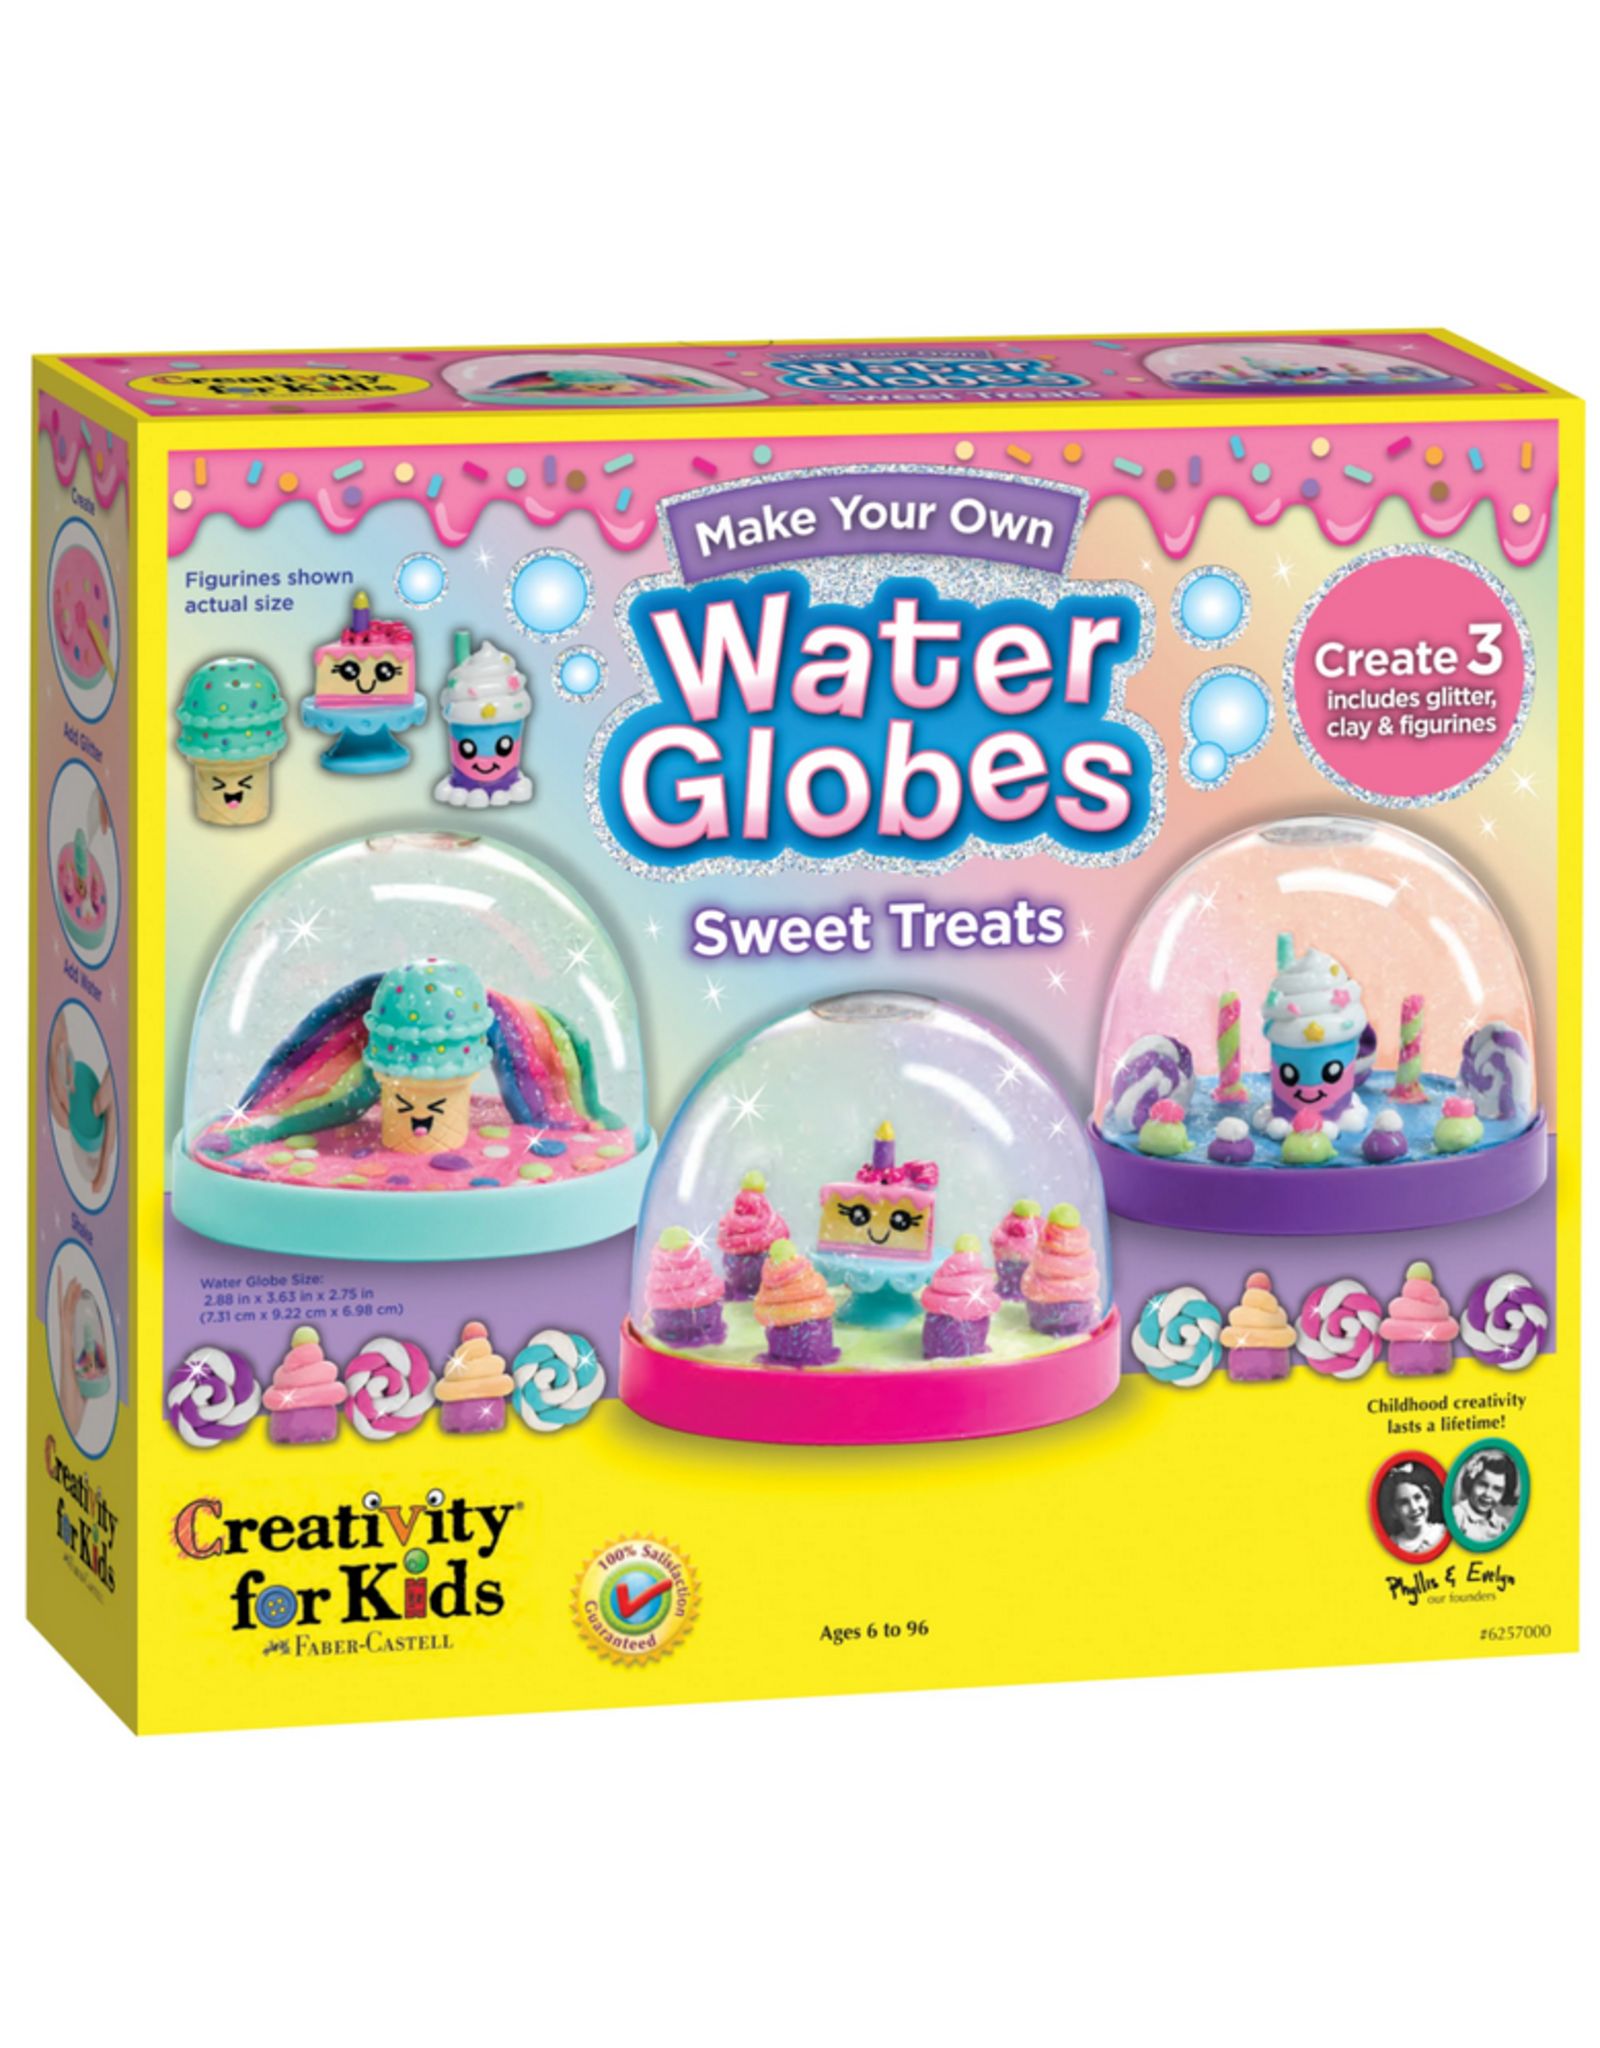 Creativity For Kids Make Your Own Water Globes-Sweet Treats